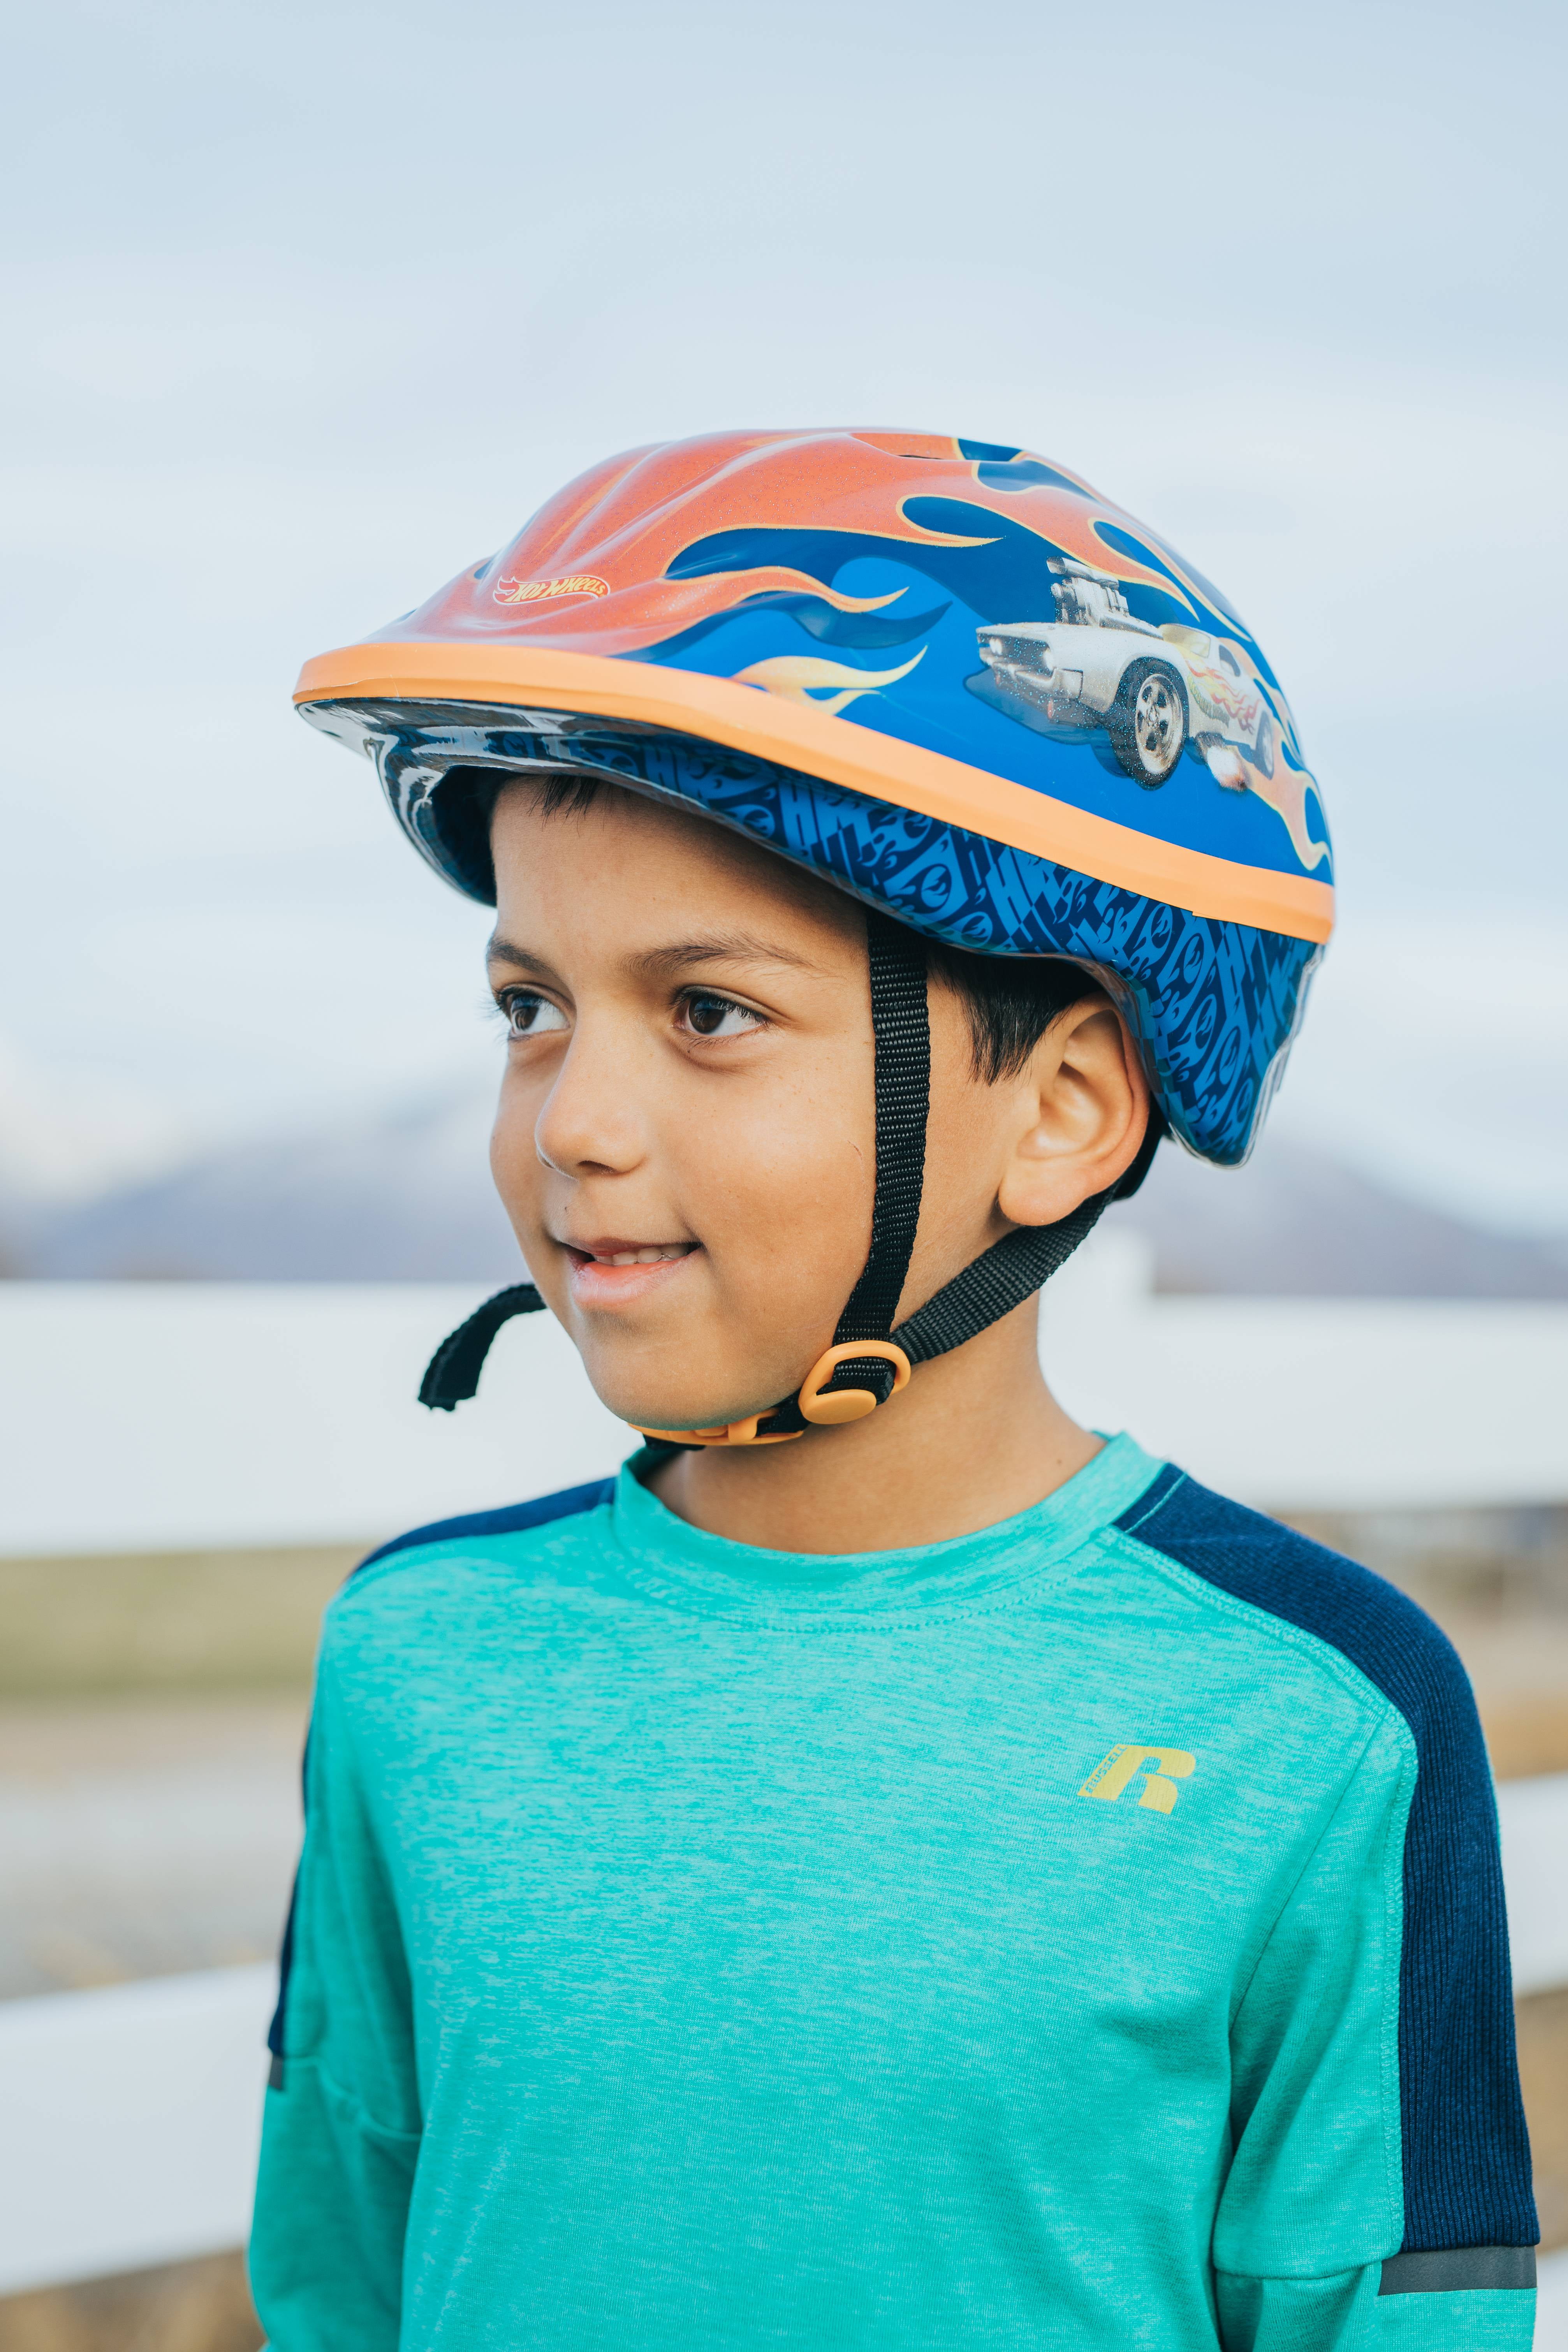 Hot Wheels Unisex_Child Casco Infantil para Patinetes Y Bicis Helmet Hockey and Roller Skating Children Multi-Coloured One Size Multi-Coloured 